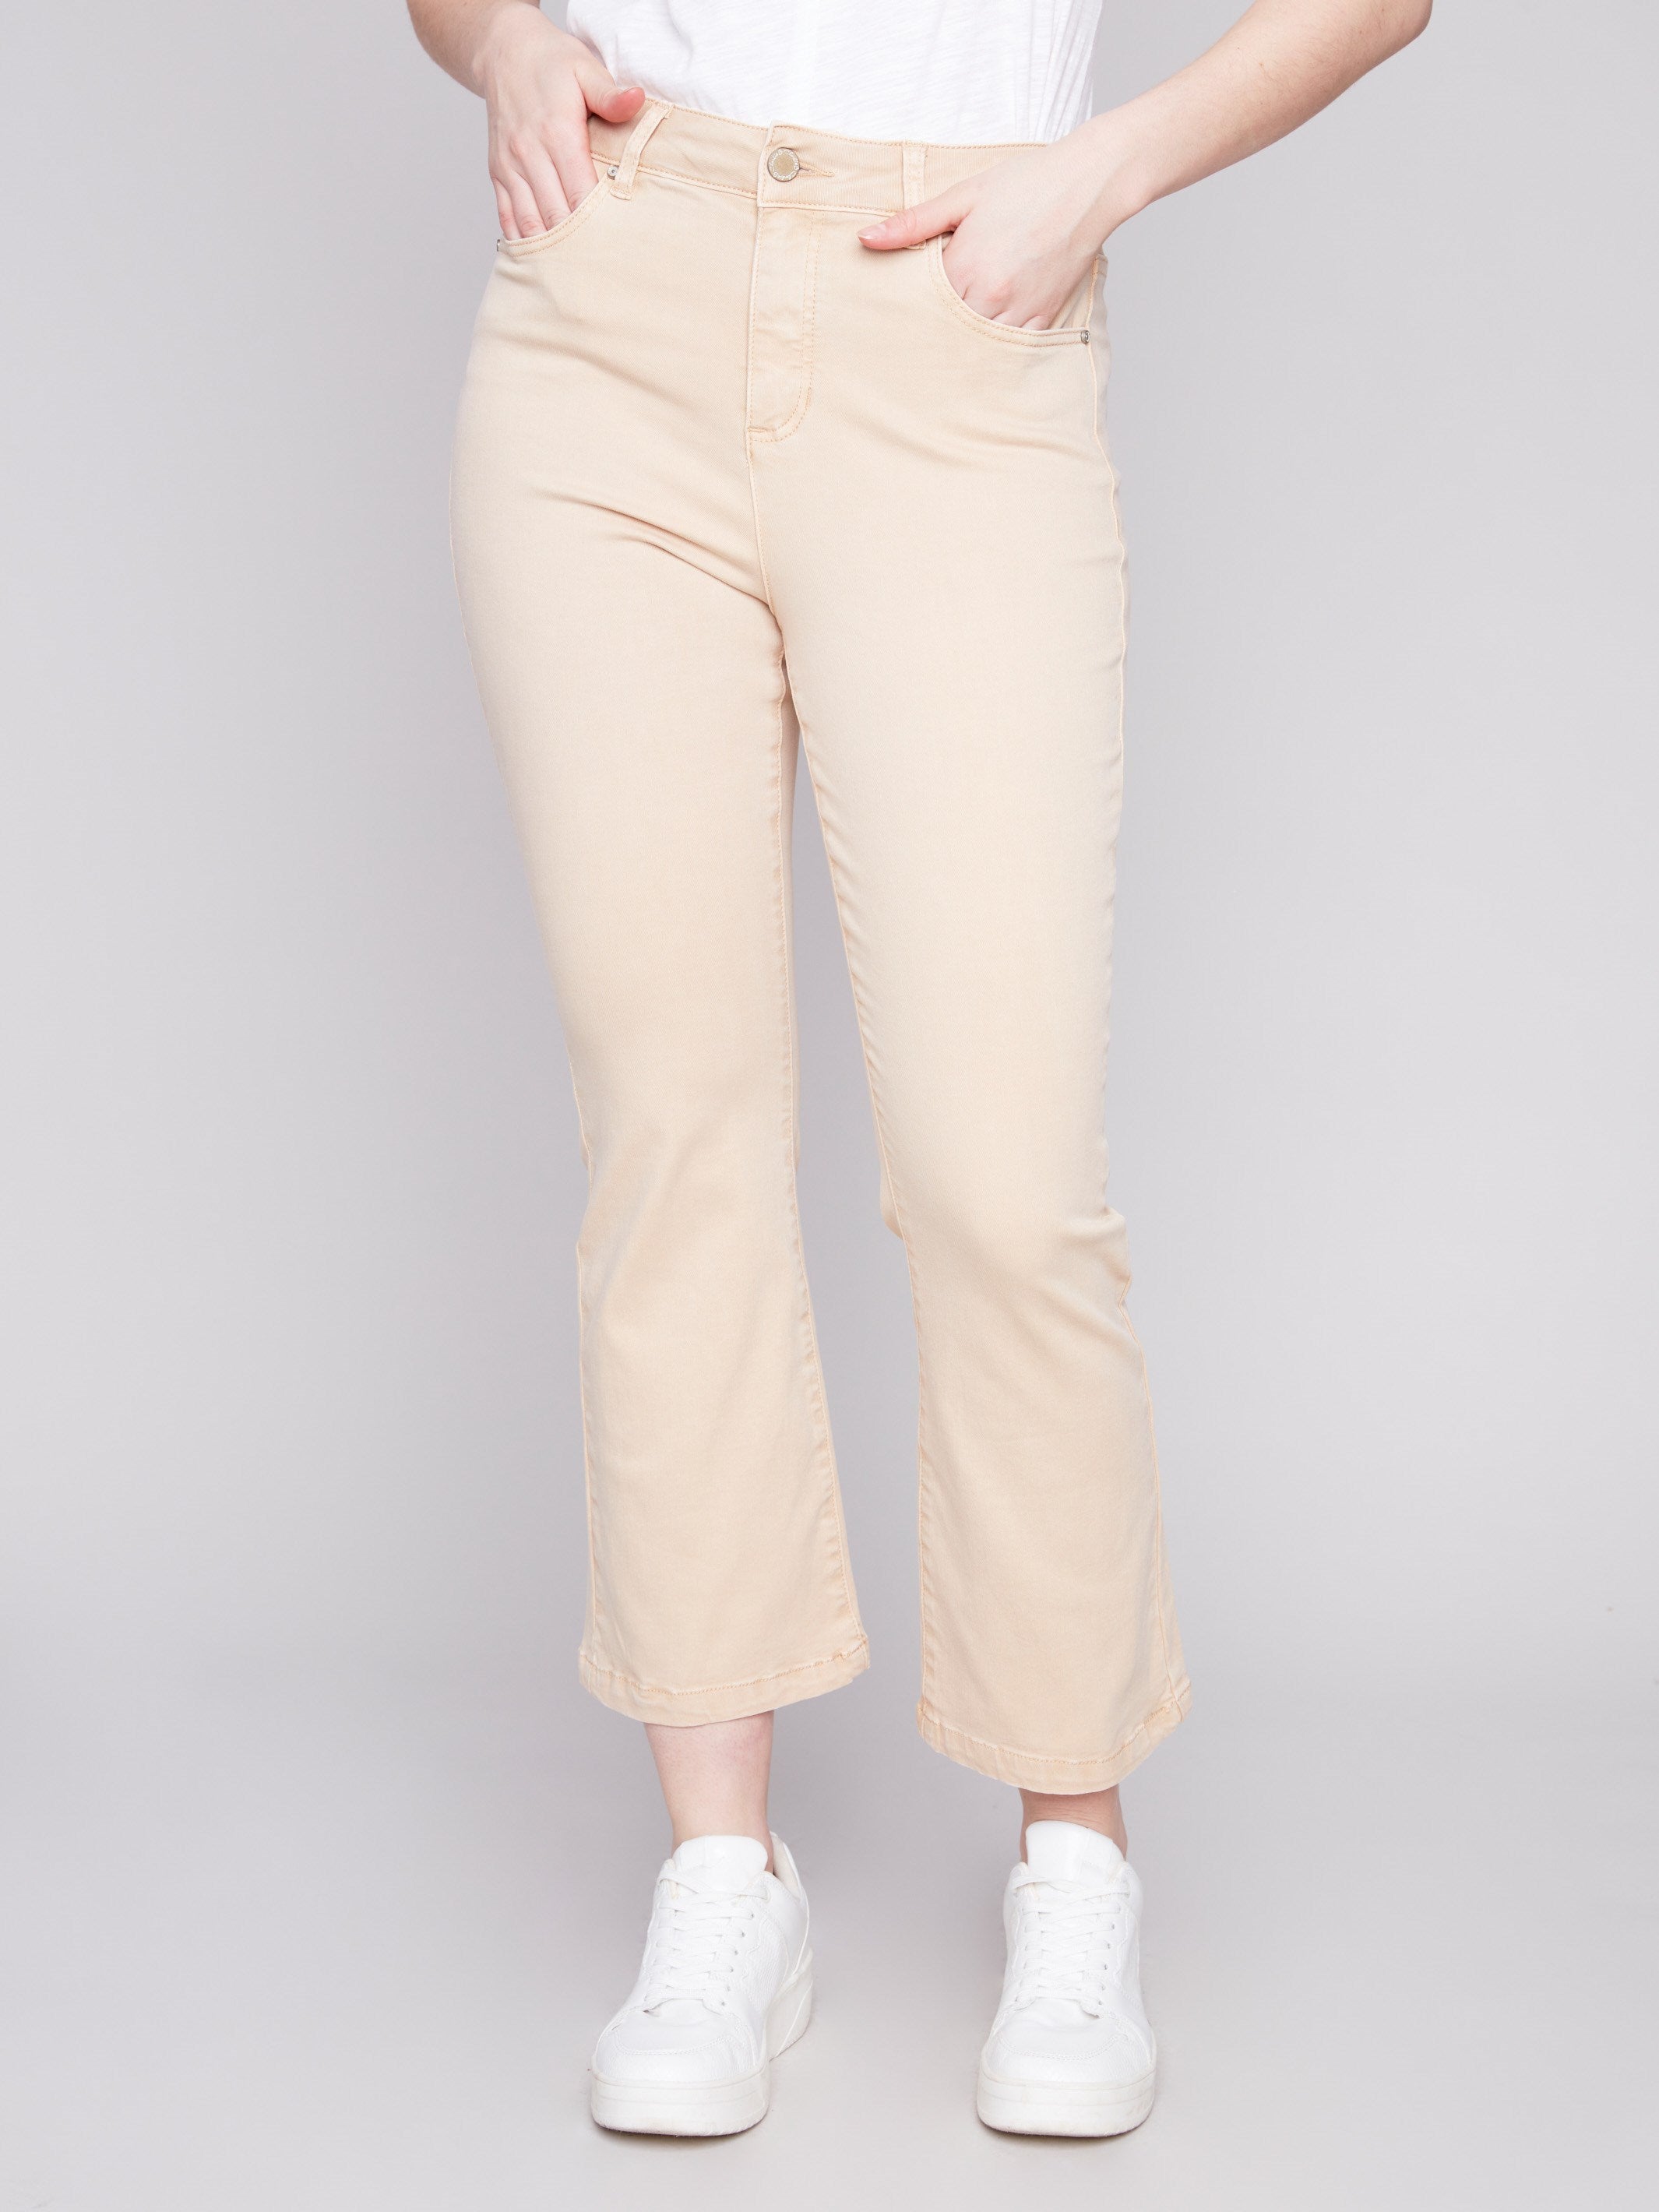 Bootcut Stretch Twill Pants - Corn - Charlie B Collection Canada - Image 2